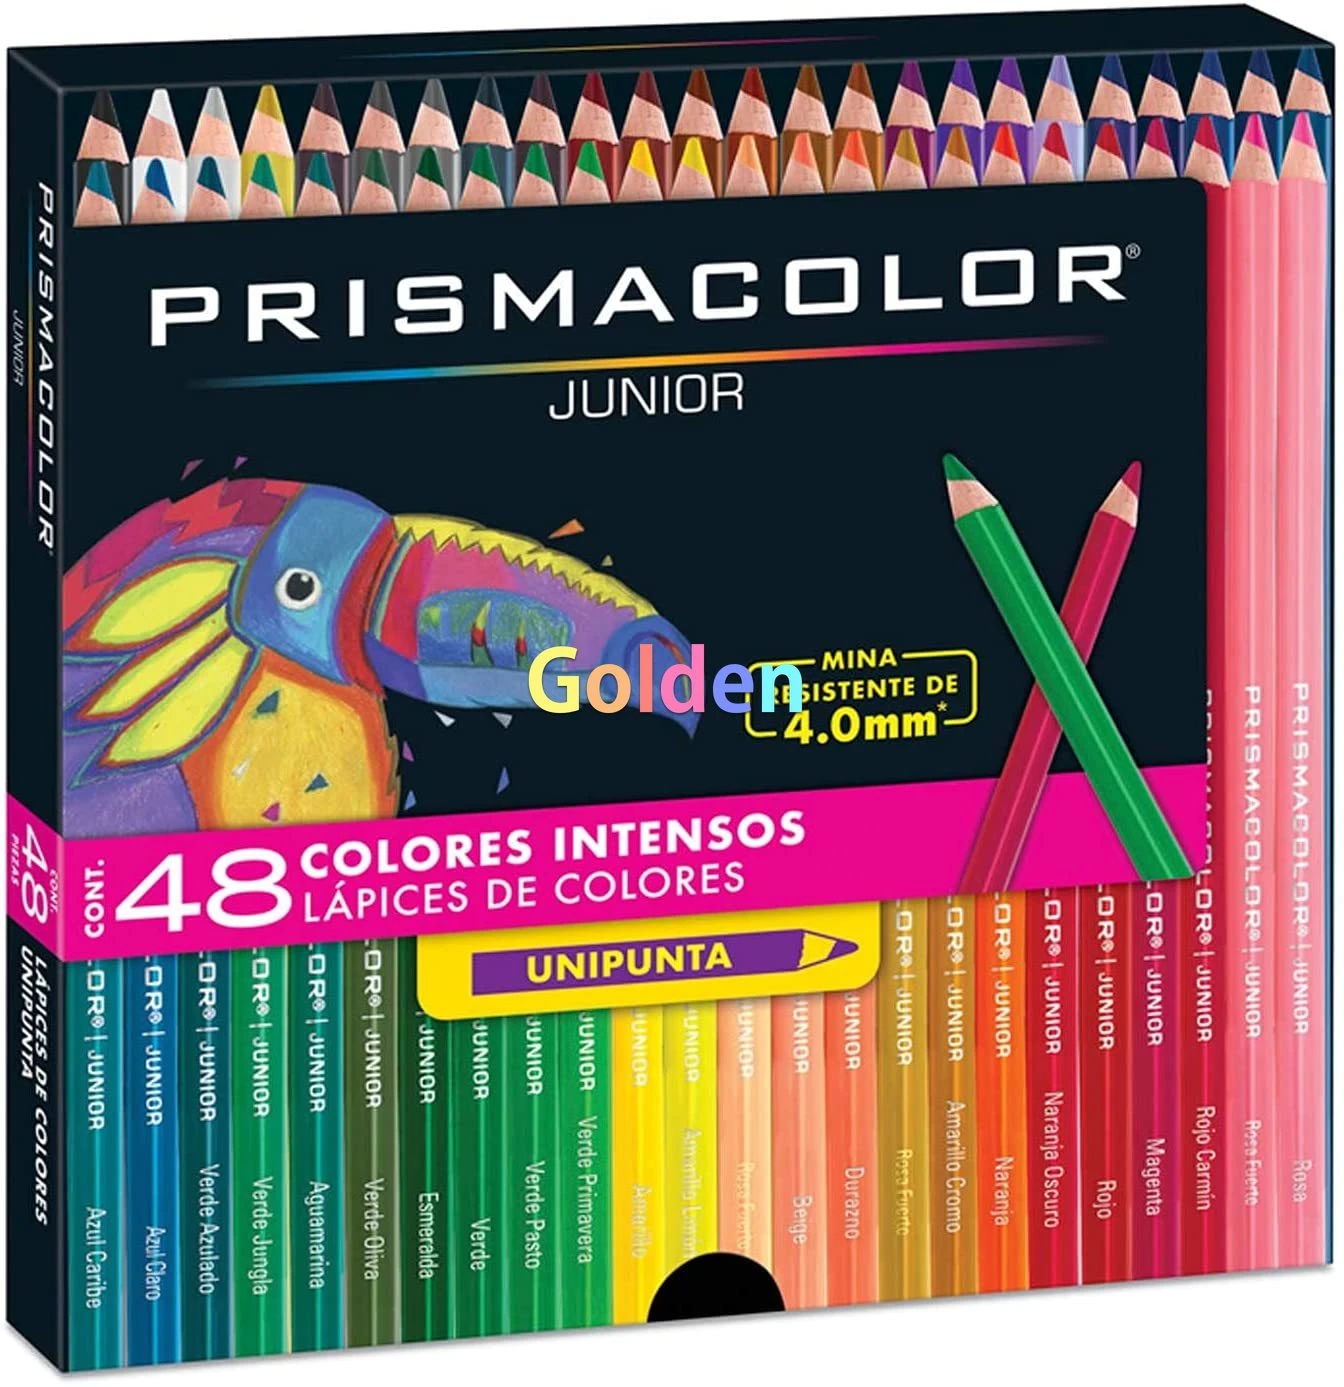 L@@K! 4 INSTANT CHRISTMAS GIFTS - 2 x 48ct AND 2x24ct Prismacolor Pencil  Sets iuu.org.tr